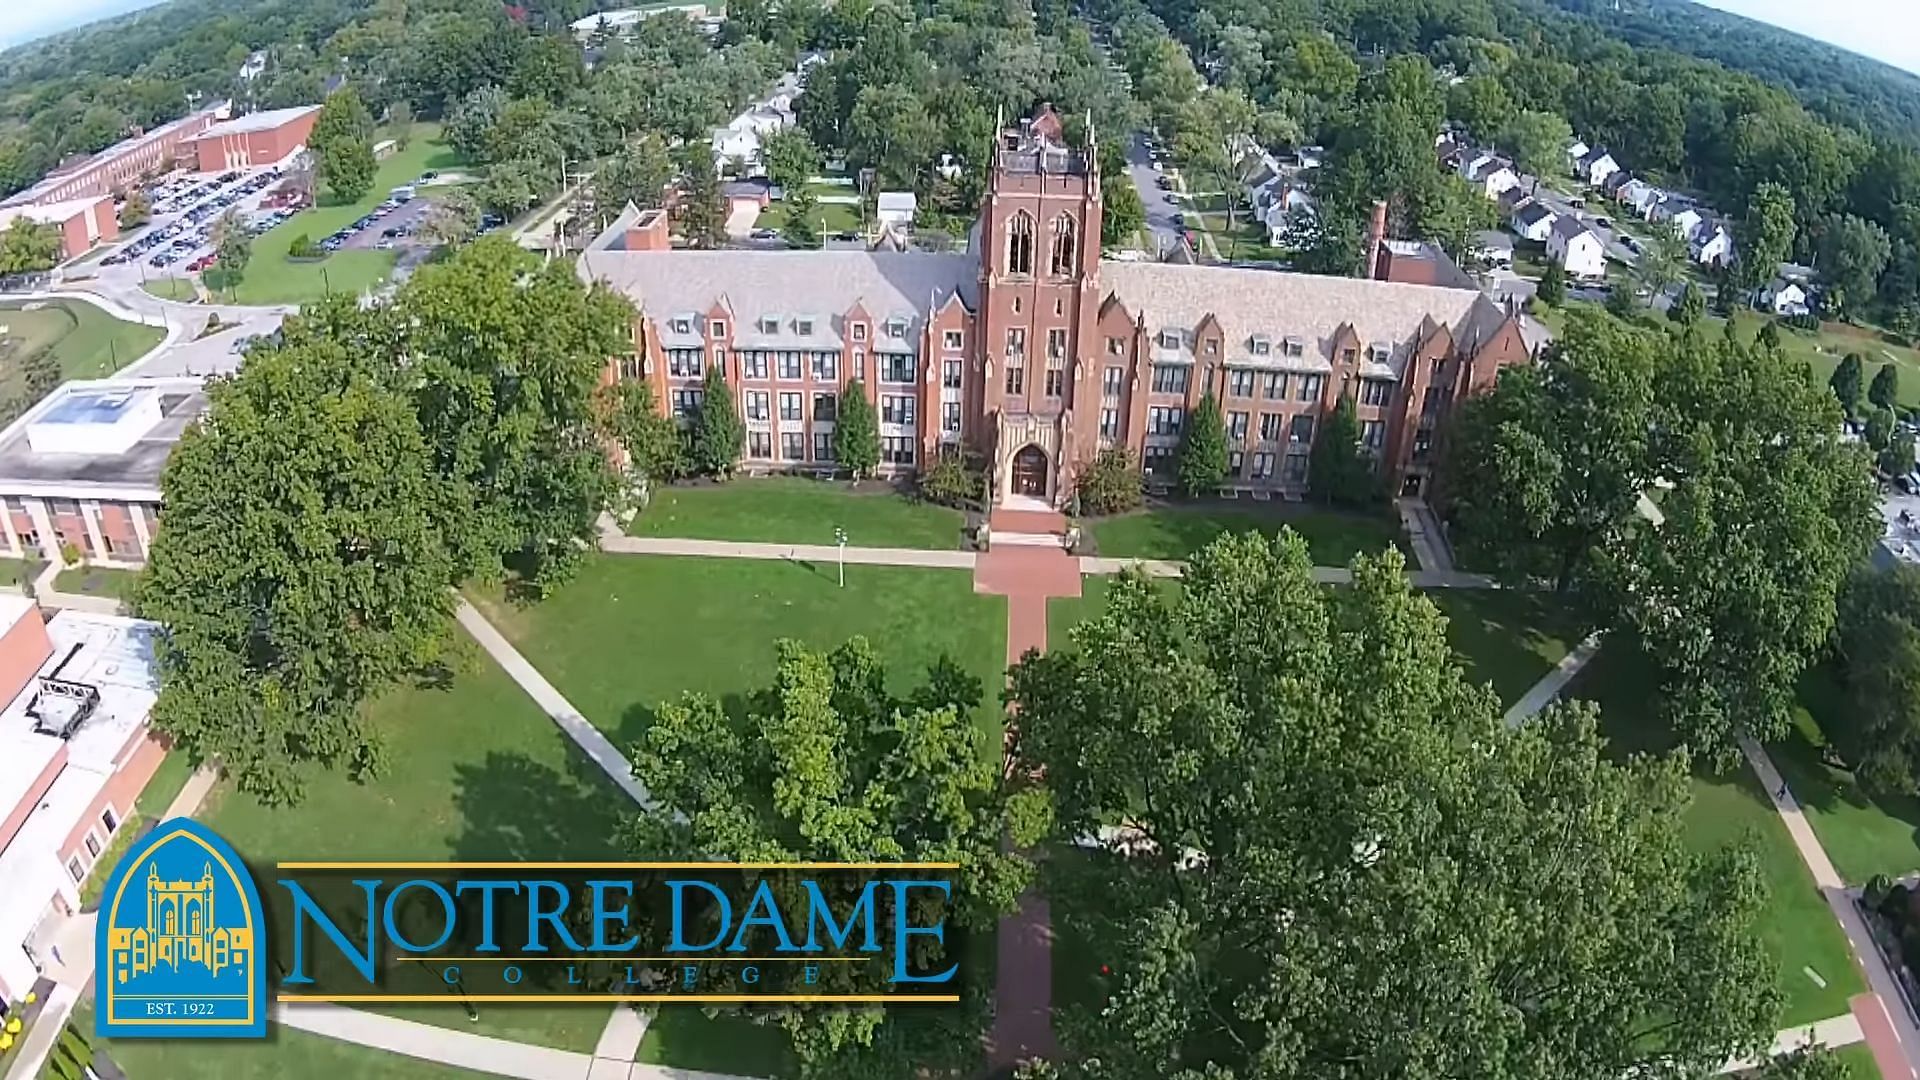 Notre Dame College all set to shut down at the end of the spring semester (Image via YouTube/NotreDameCollege)